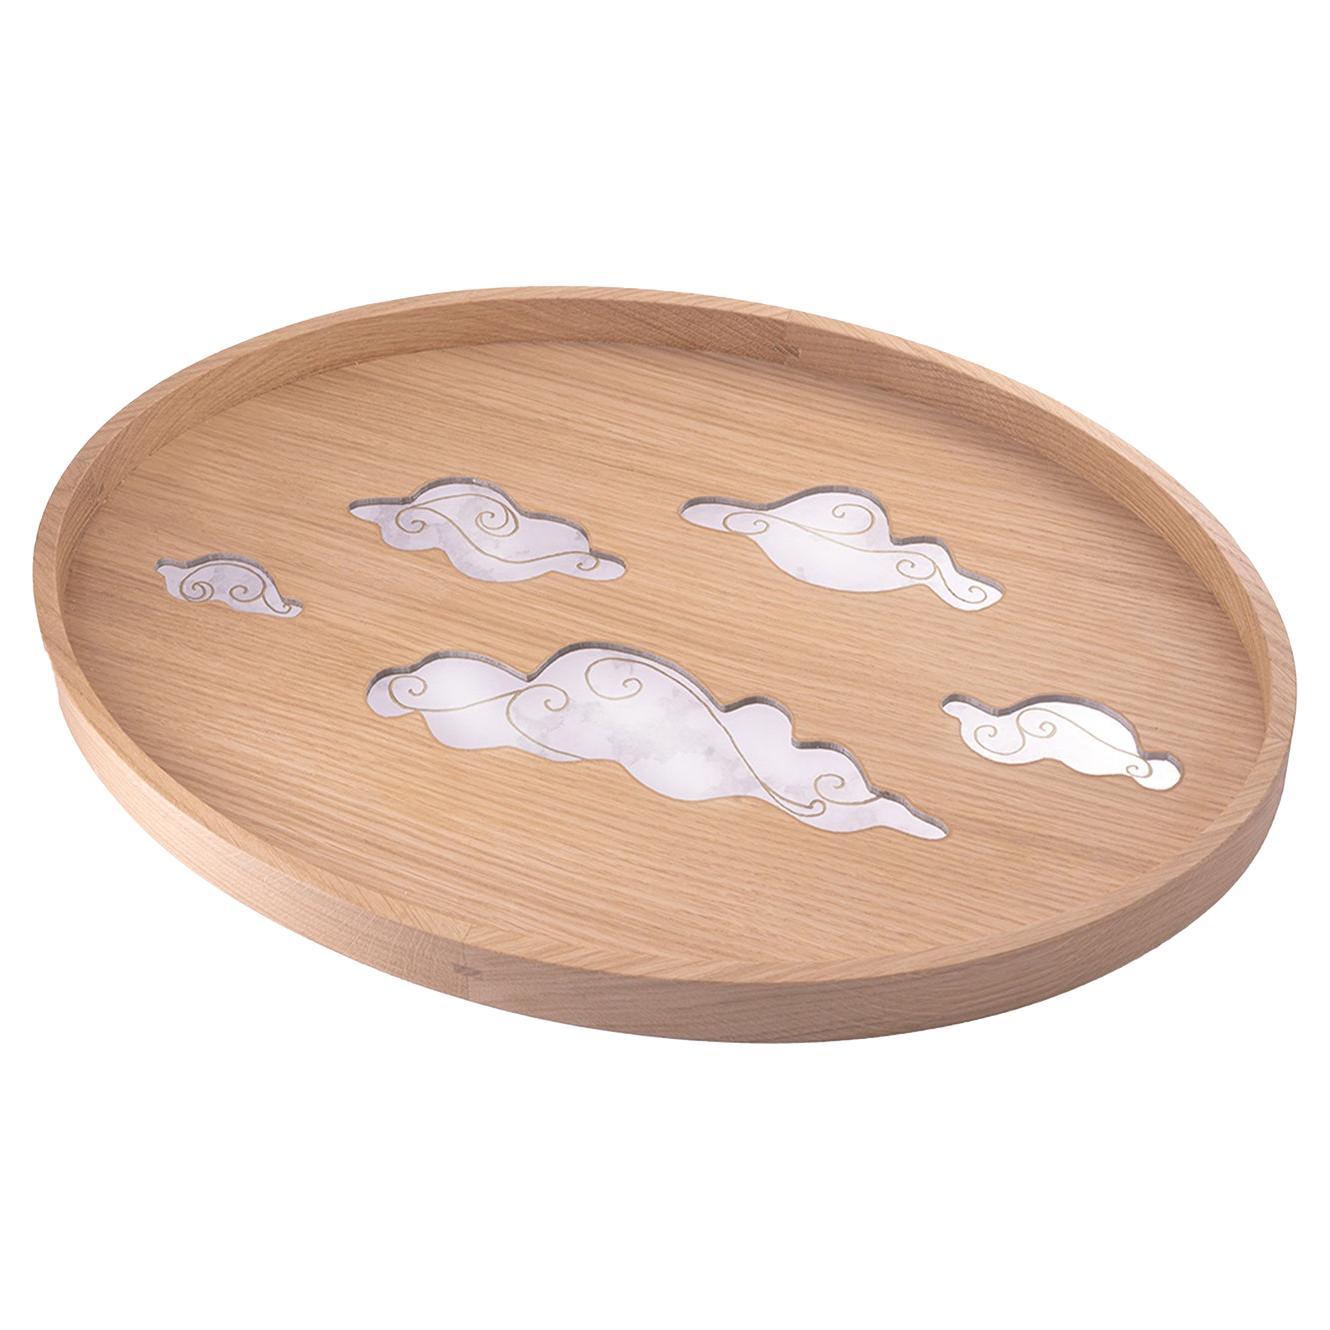 Casarialto Atelier Clouds Mirror Tray by Giovanni Simionato For Sale